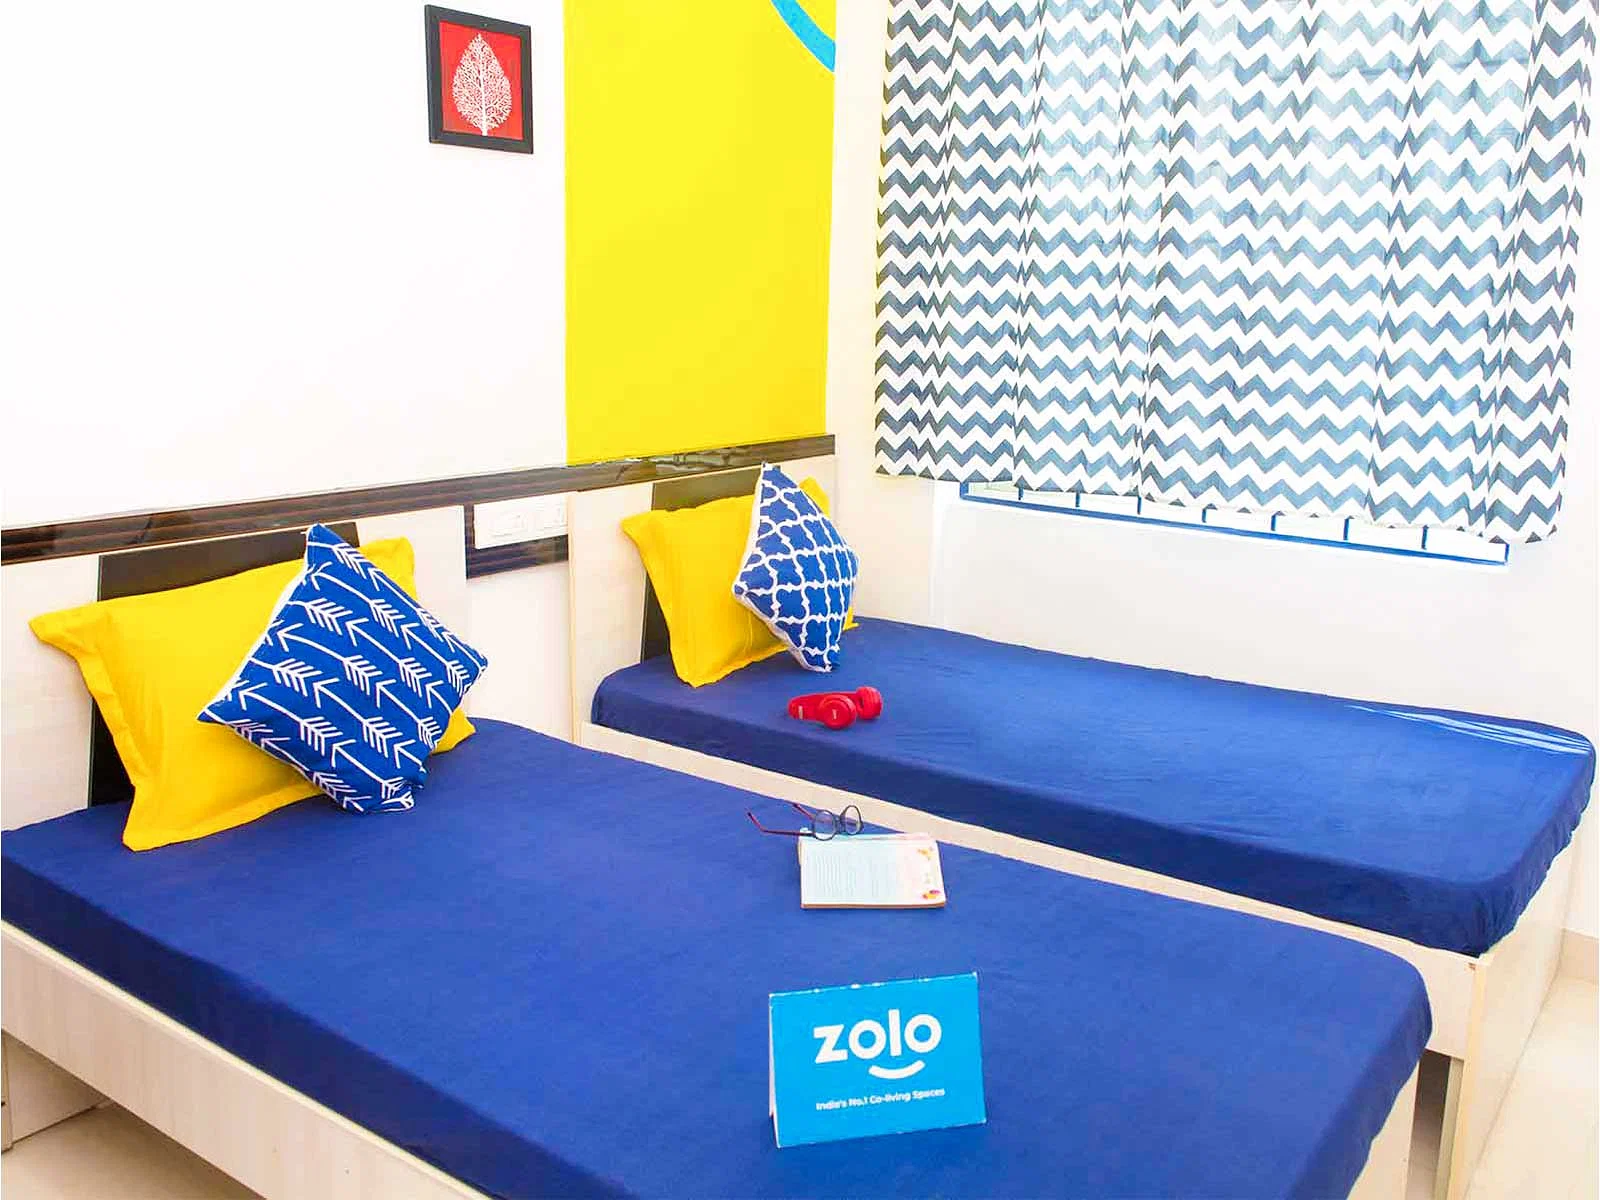 safe and affordable hostels for men and women students with 24/7 security and CCTV surveillance-Zolo Hazel